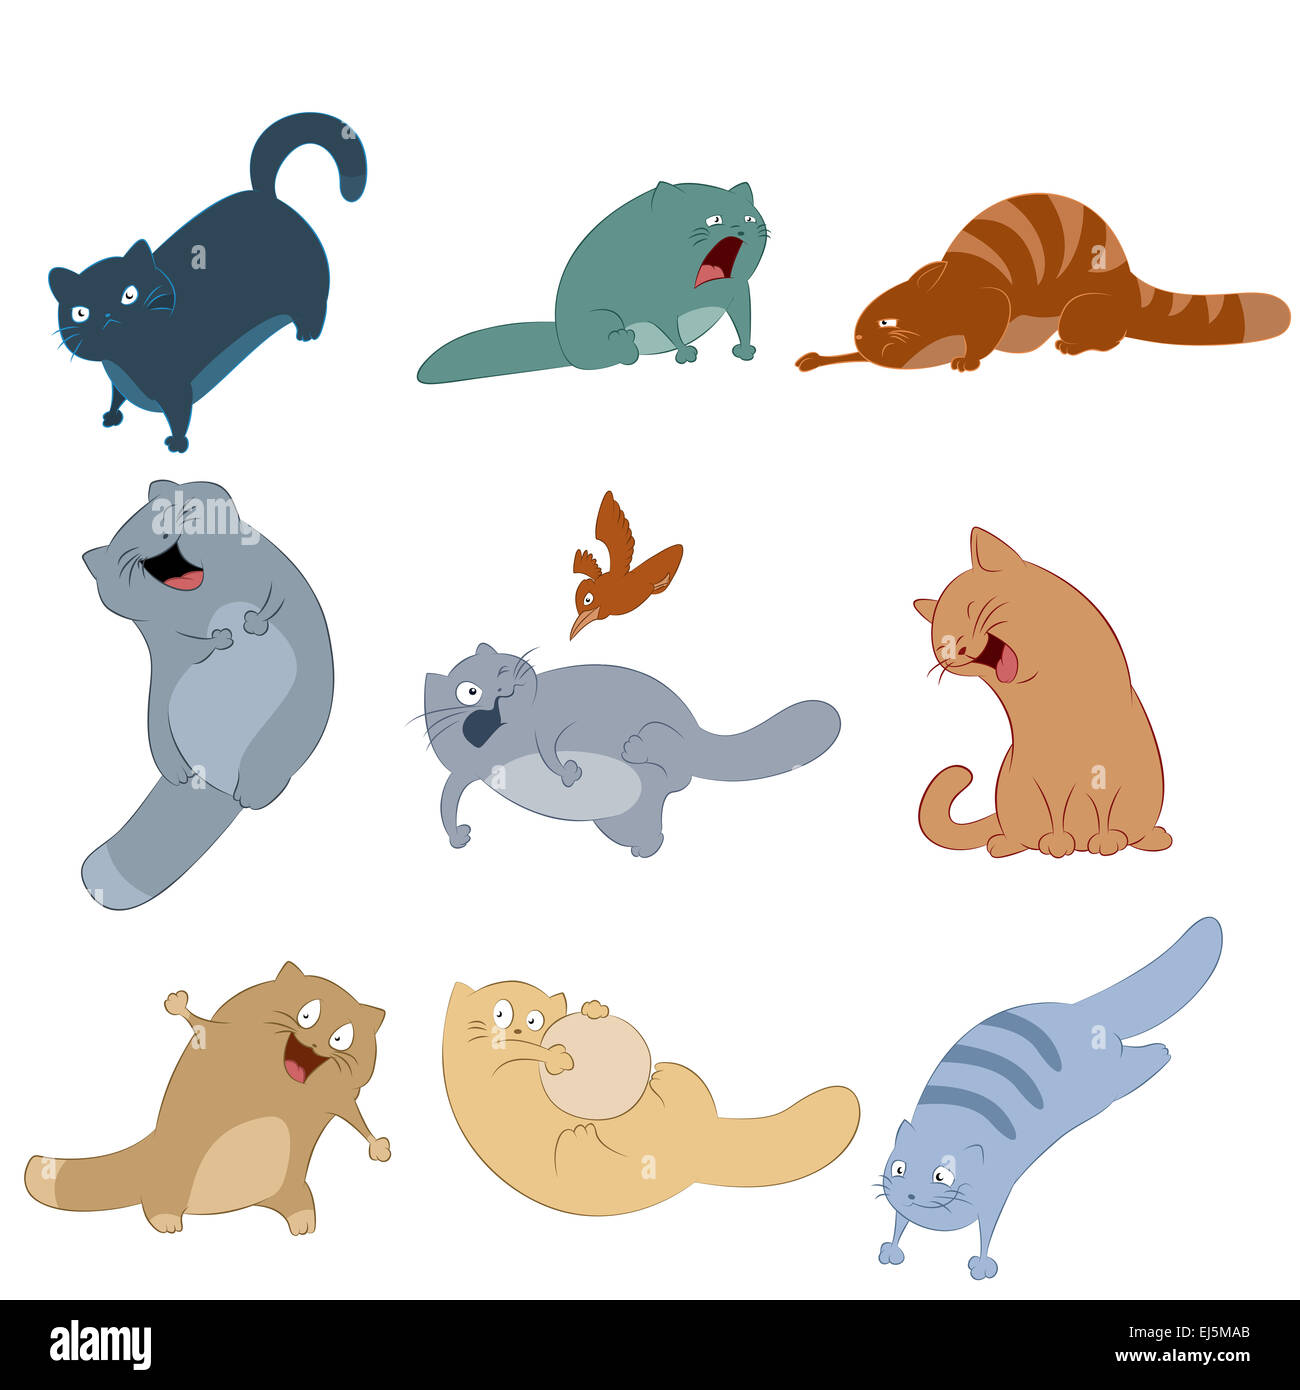 Vector image of collection of cat icons Stock Photo